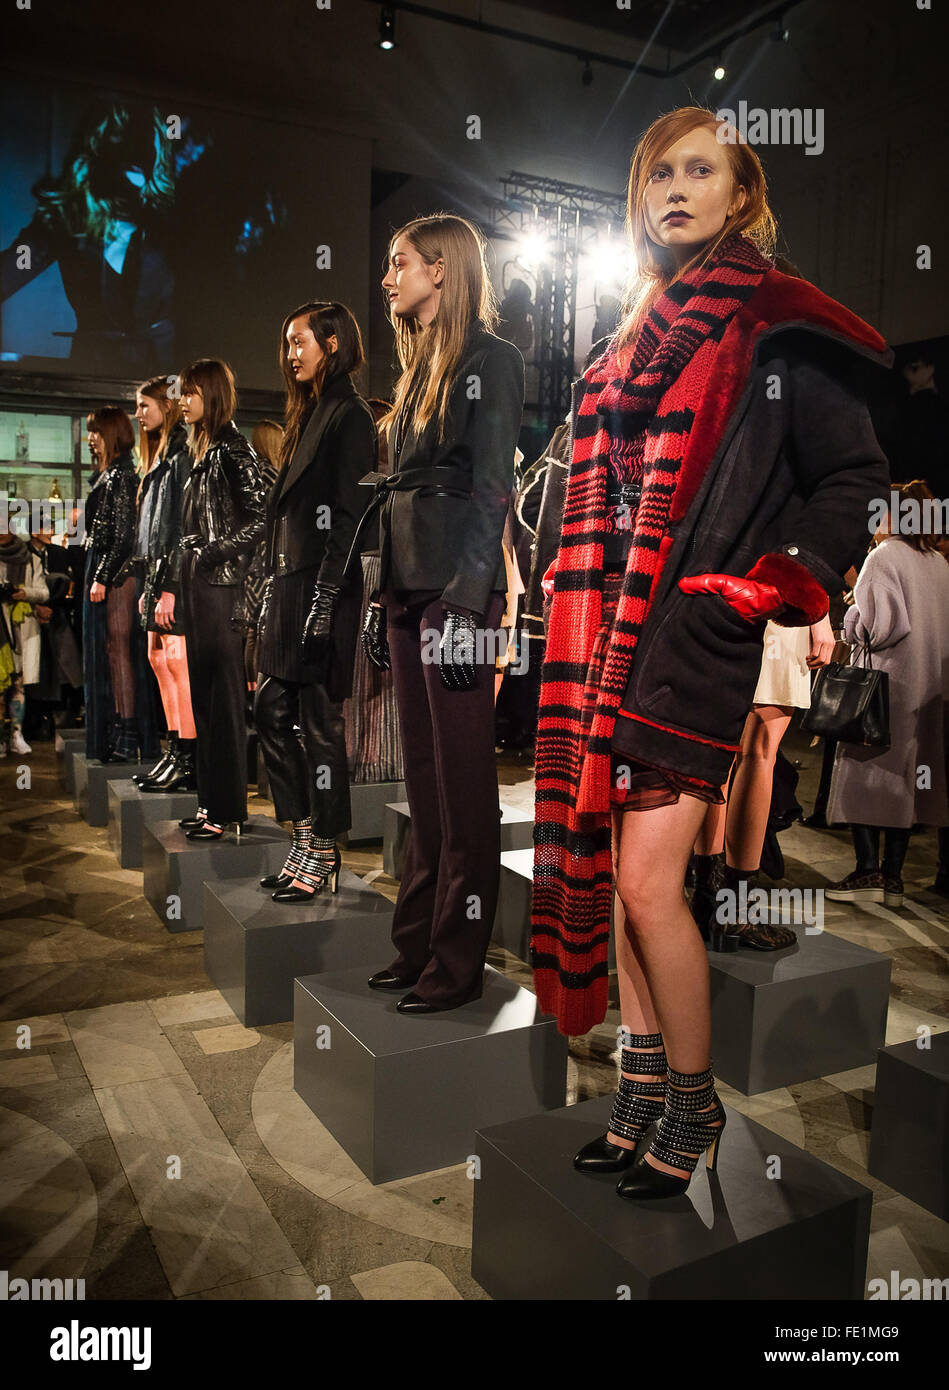 Stockholm, Sweden. 3rd Feb, 2016. Models display designs from Swedish fashion brand J. Lindeberg during the Stockholm Fashion Week autumn/winter 2016 in Stockholm, capital of Sweden, on Feb. 3, 2016. The collection uses fabrics like soft mohair, wools and quilted nylons in rich earth tones blended into complex layers to create an impression of rain forests, tundra and highlands. © Rob Schoenbaum/Xinhua/Alamy Live News Stock Photo